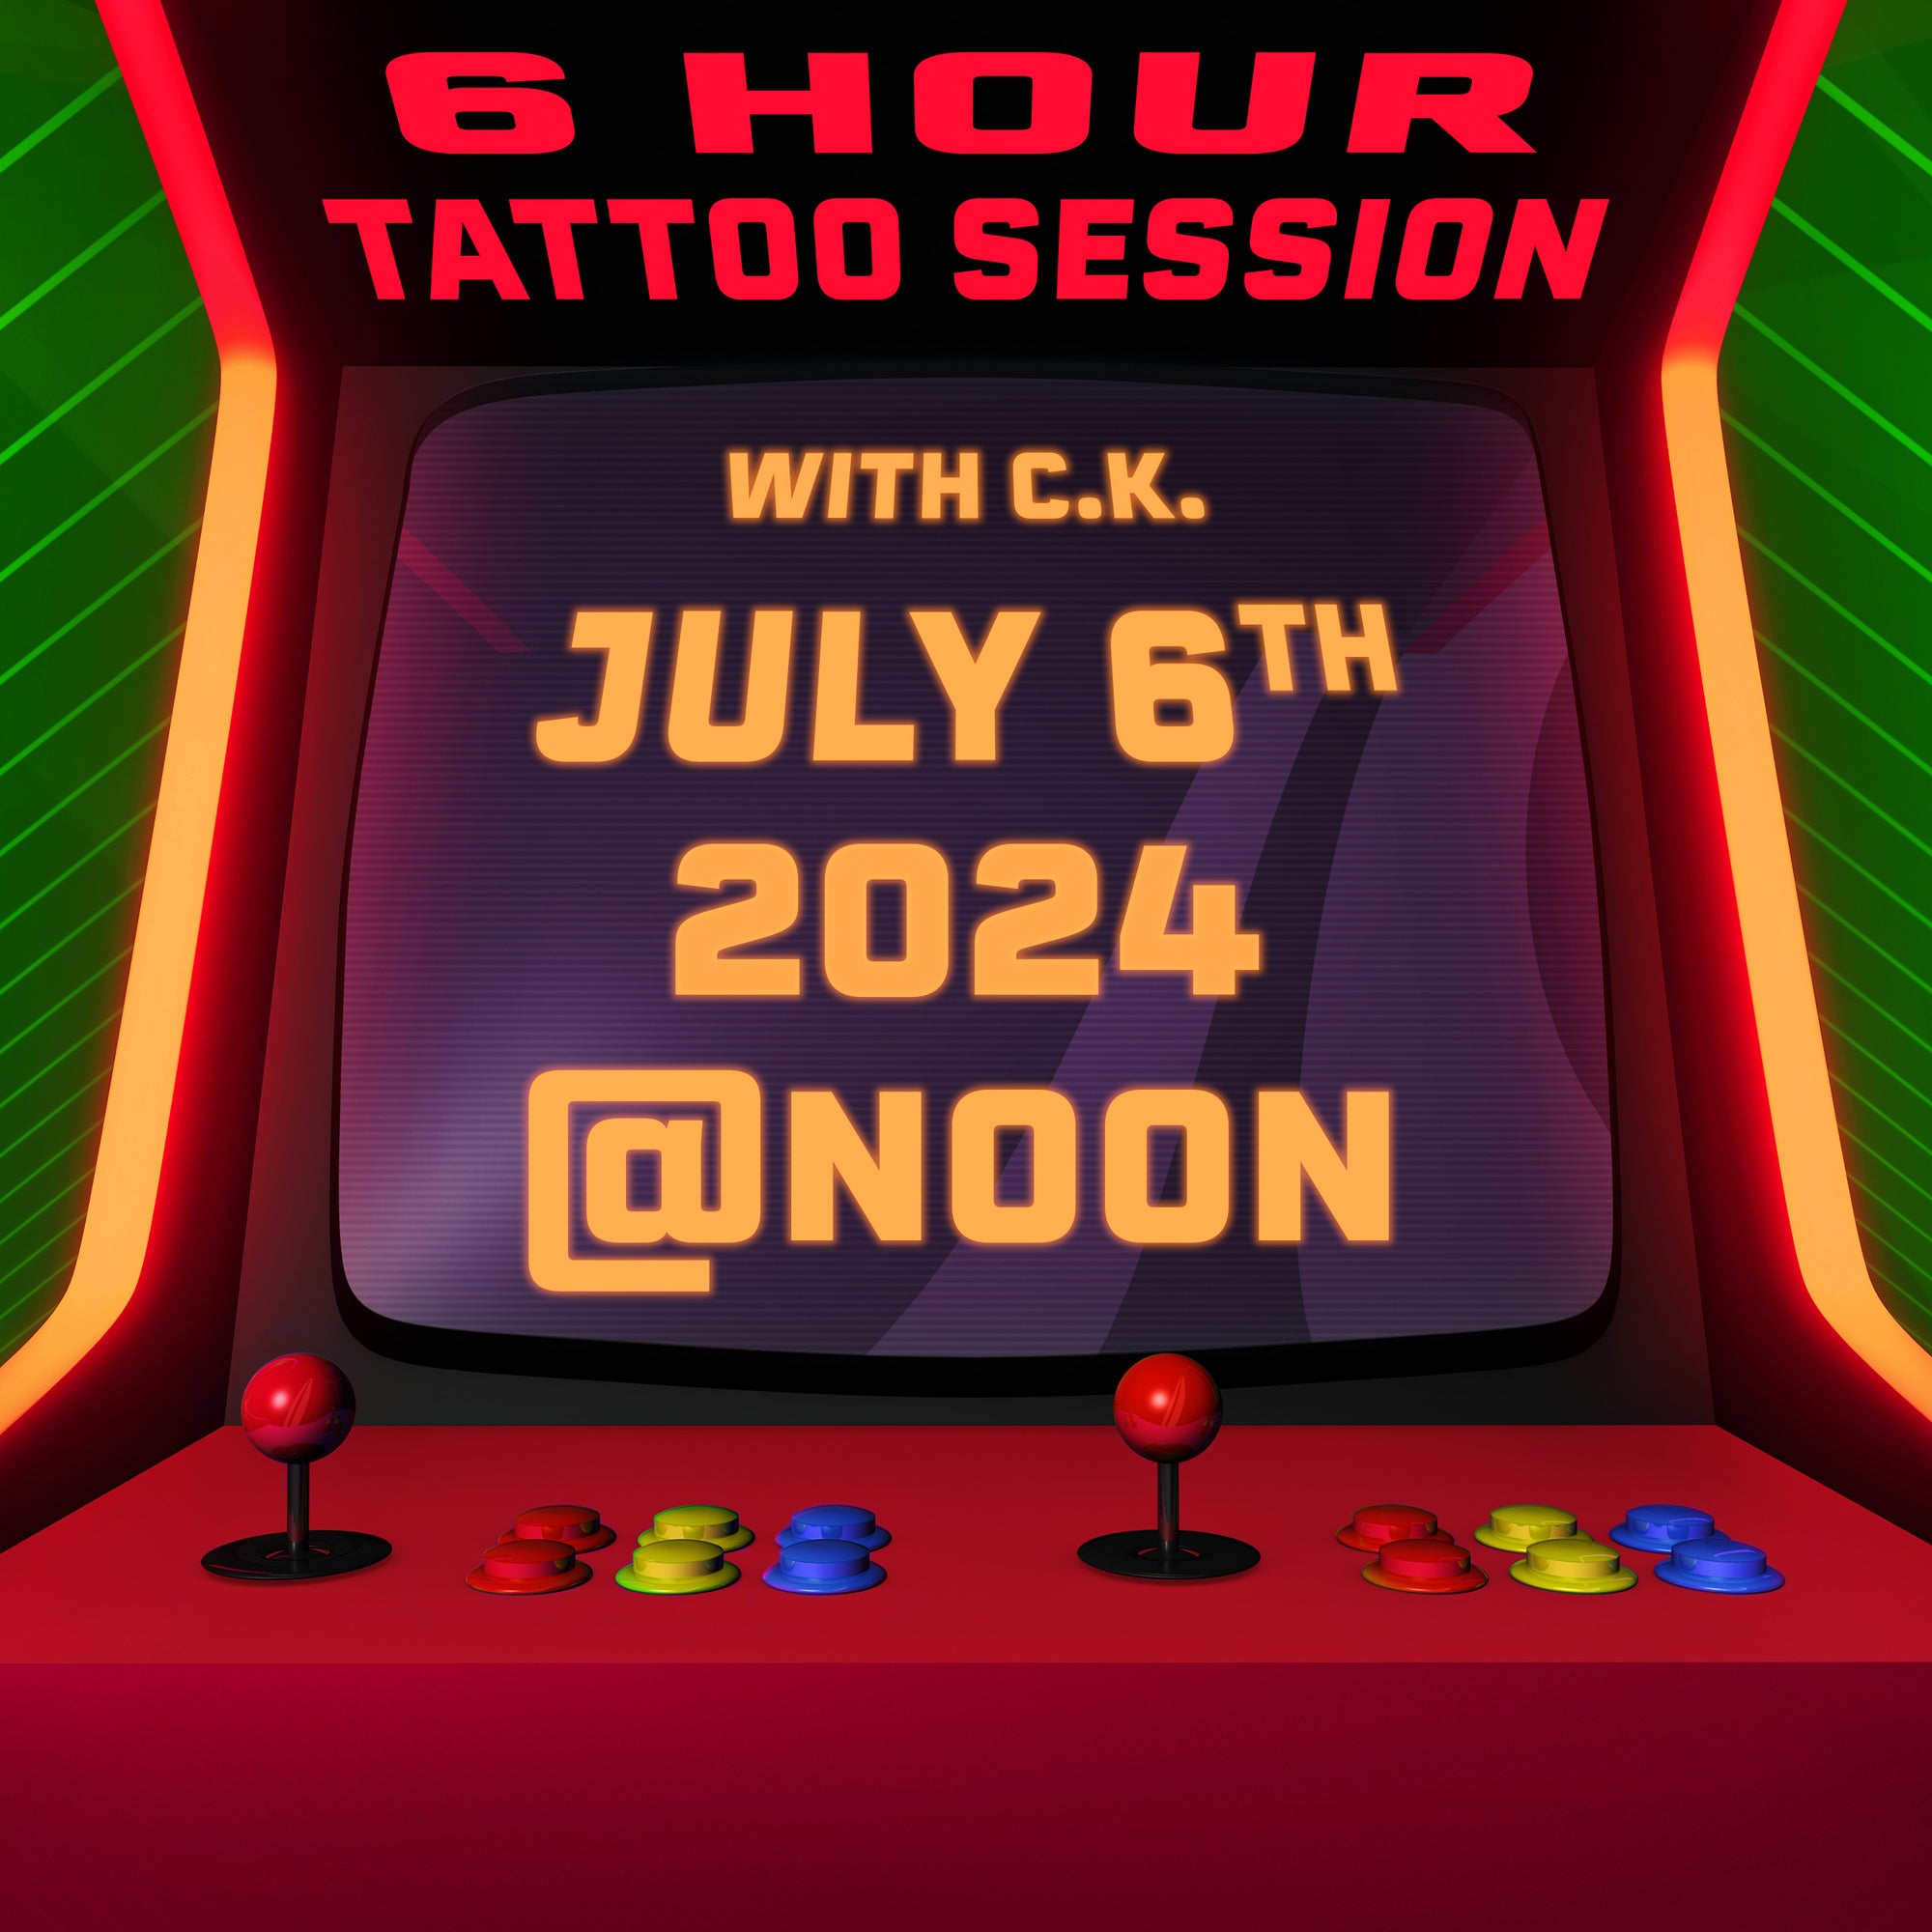 6 hour Tattoo Session with CK July 6th, 2024